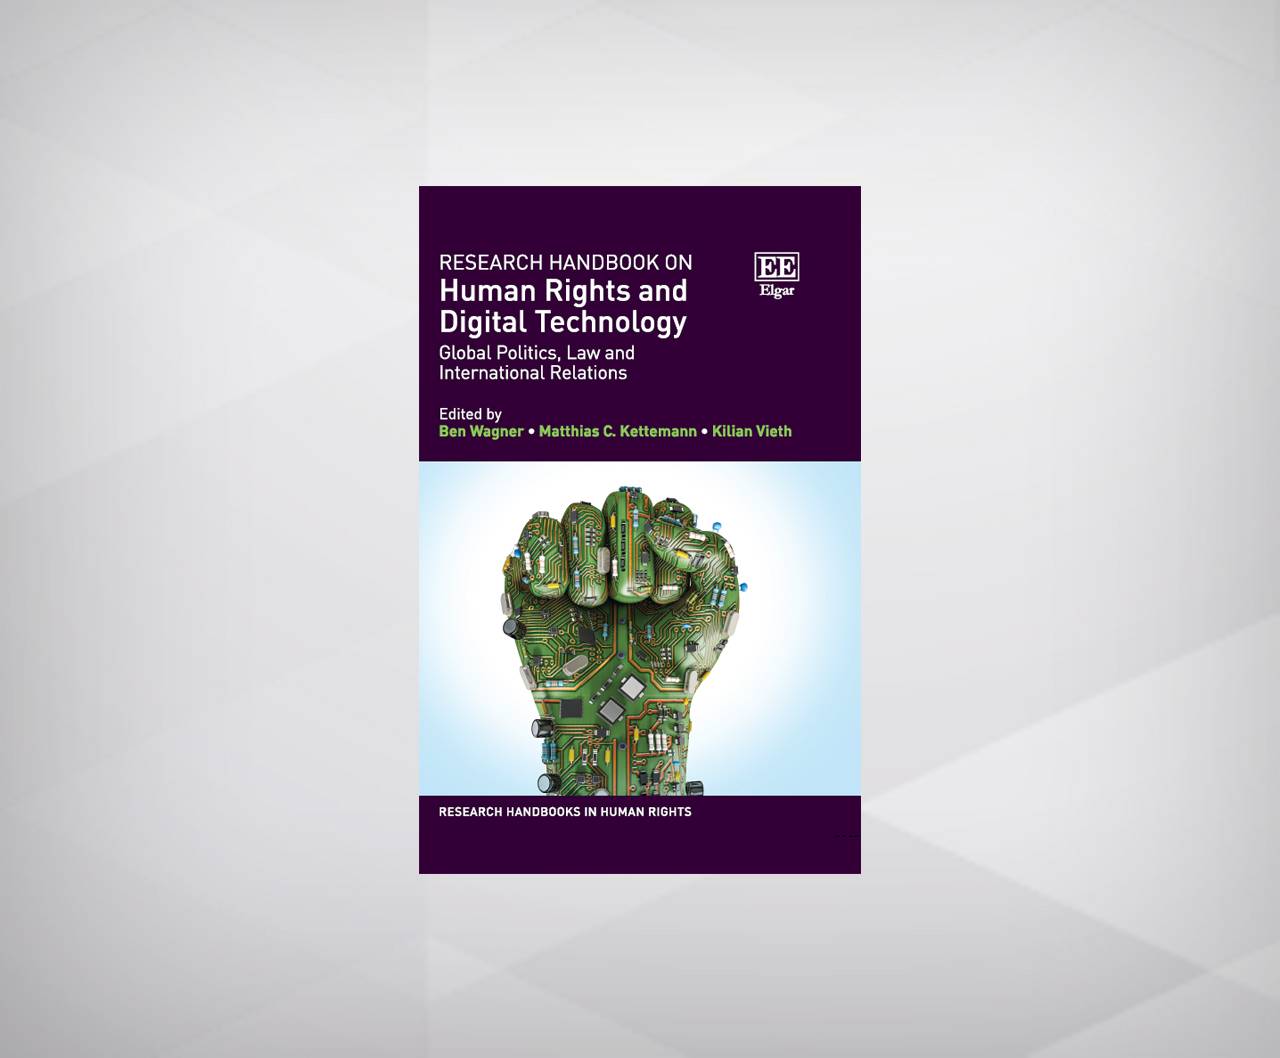 Research Handbook on Human Rights and Digital Technologies: Global Politics, Law and International Relations